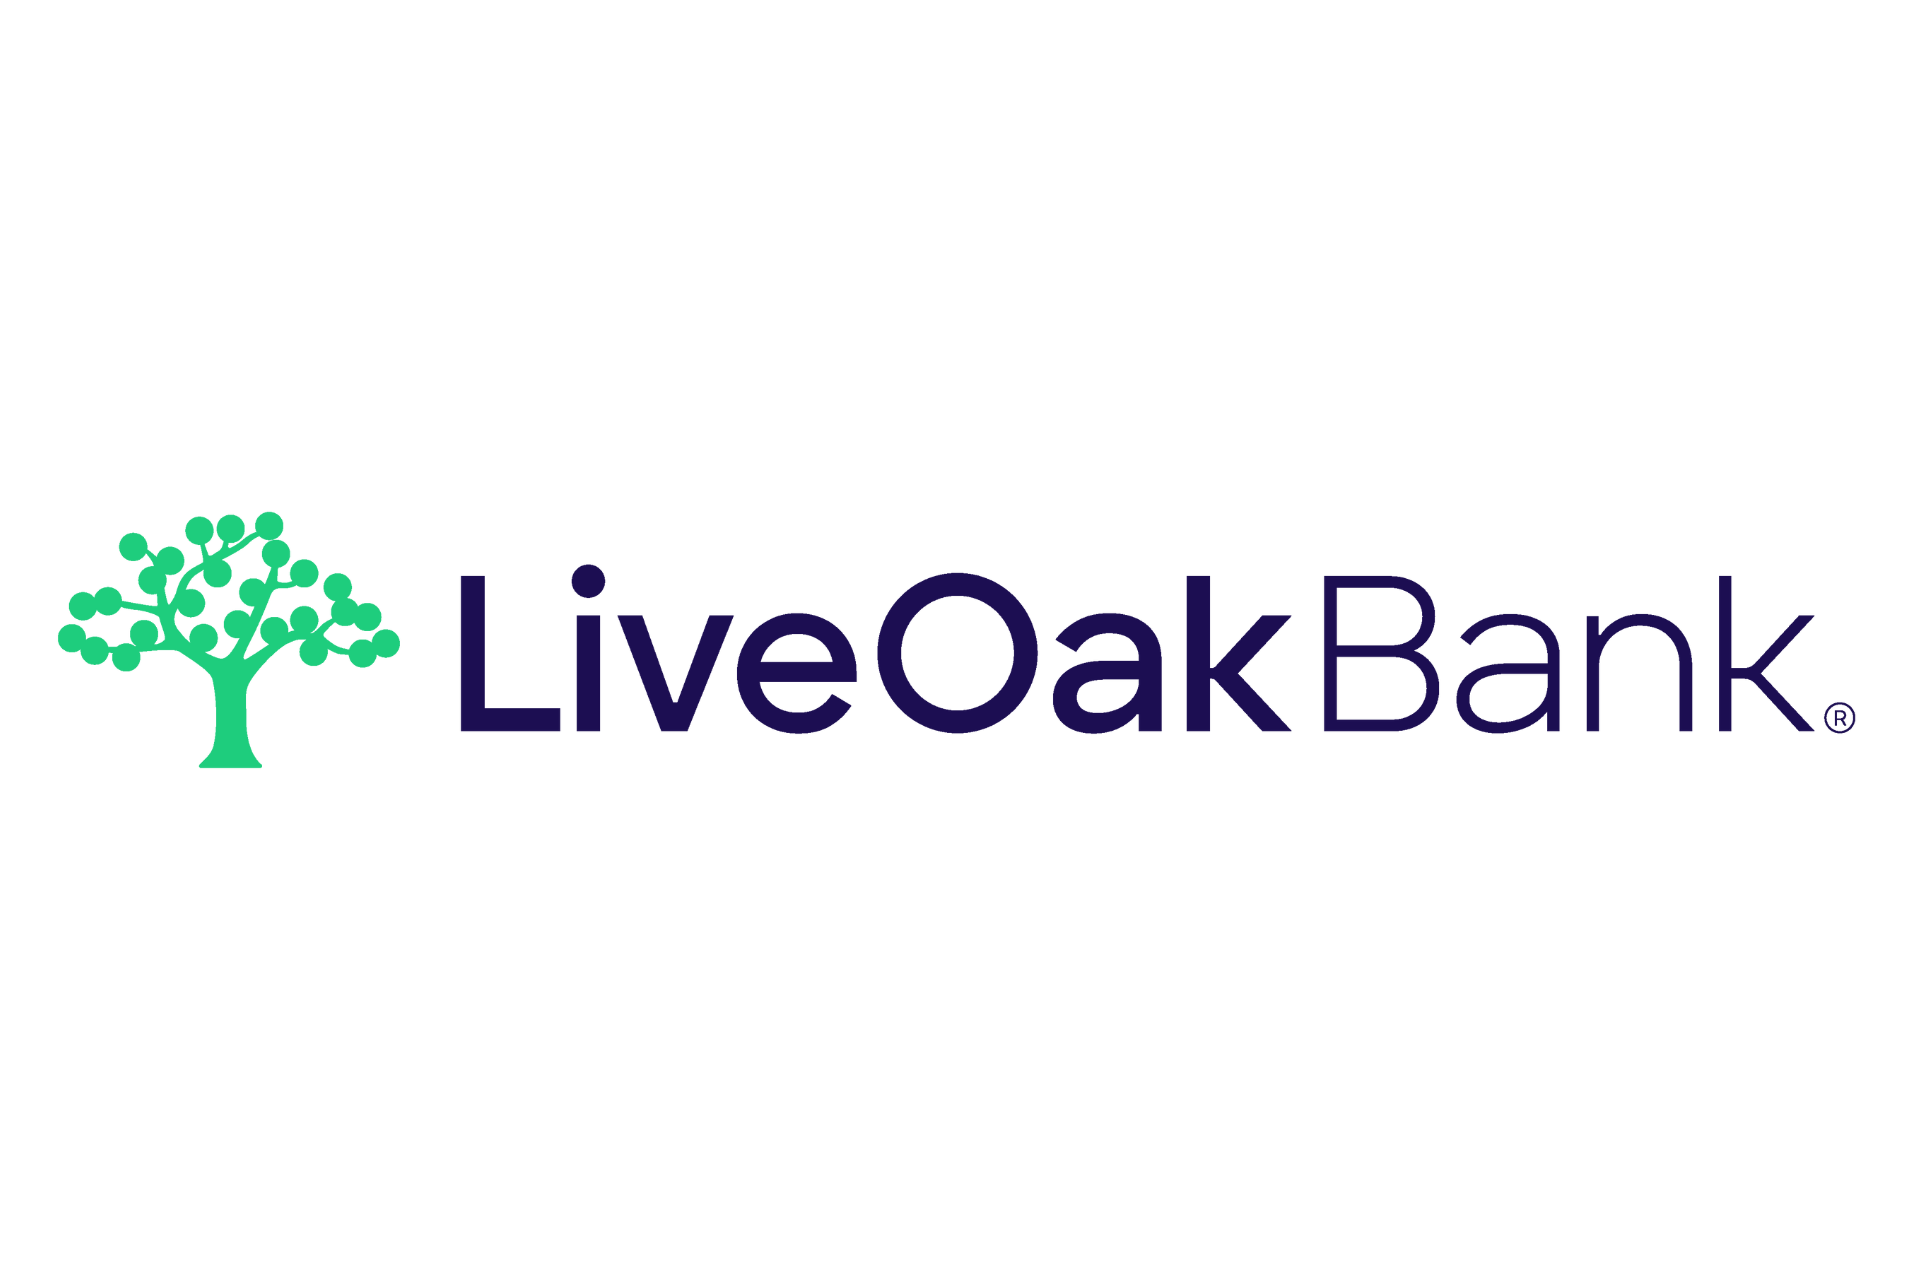 The logo for live oak bank has a tree on it.